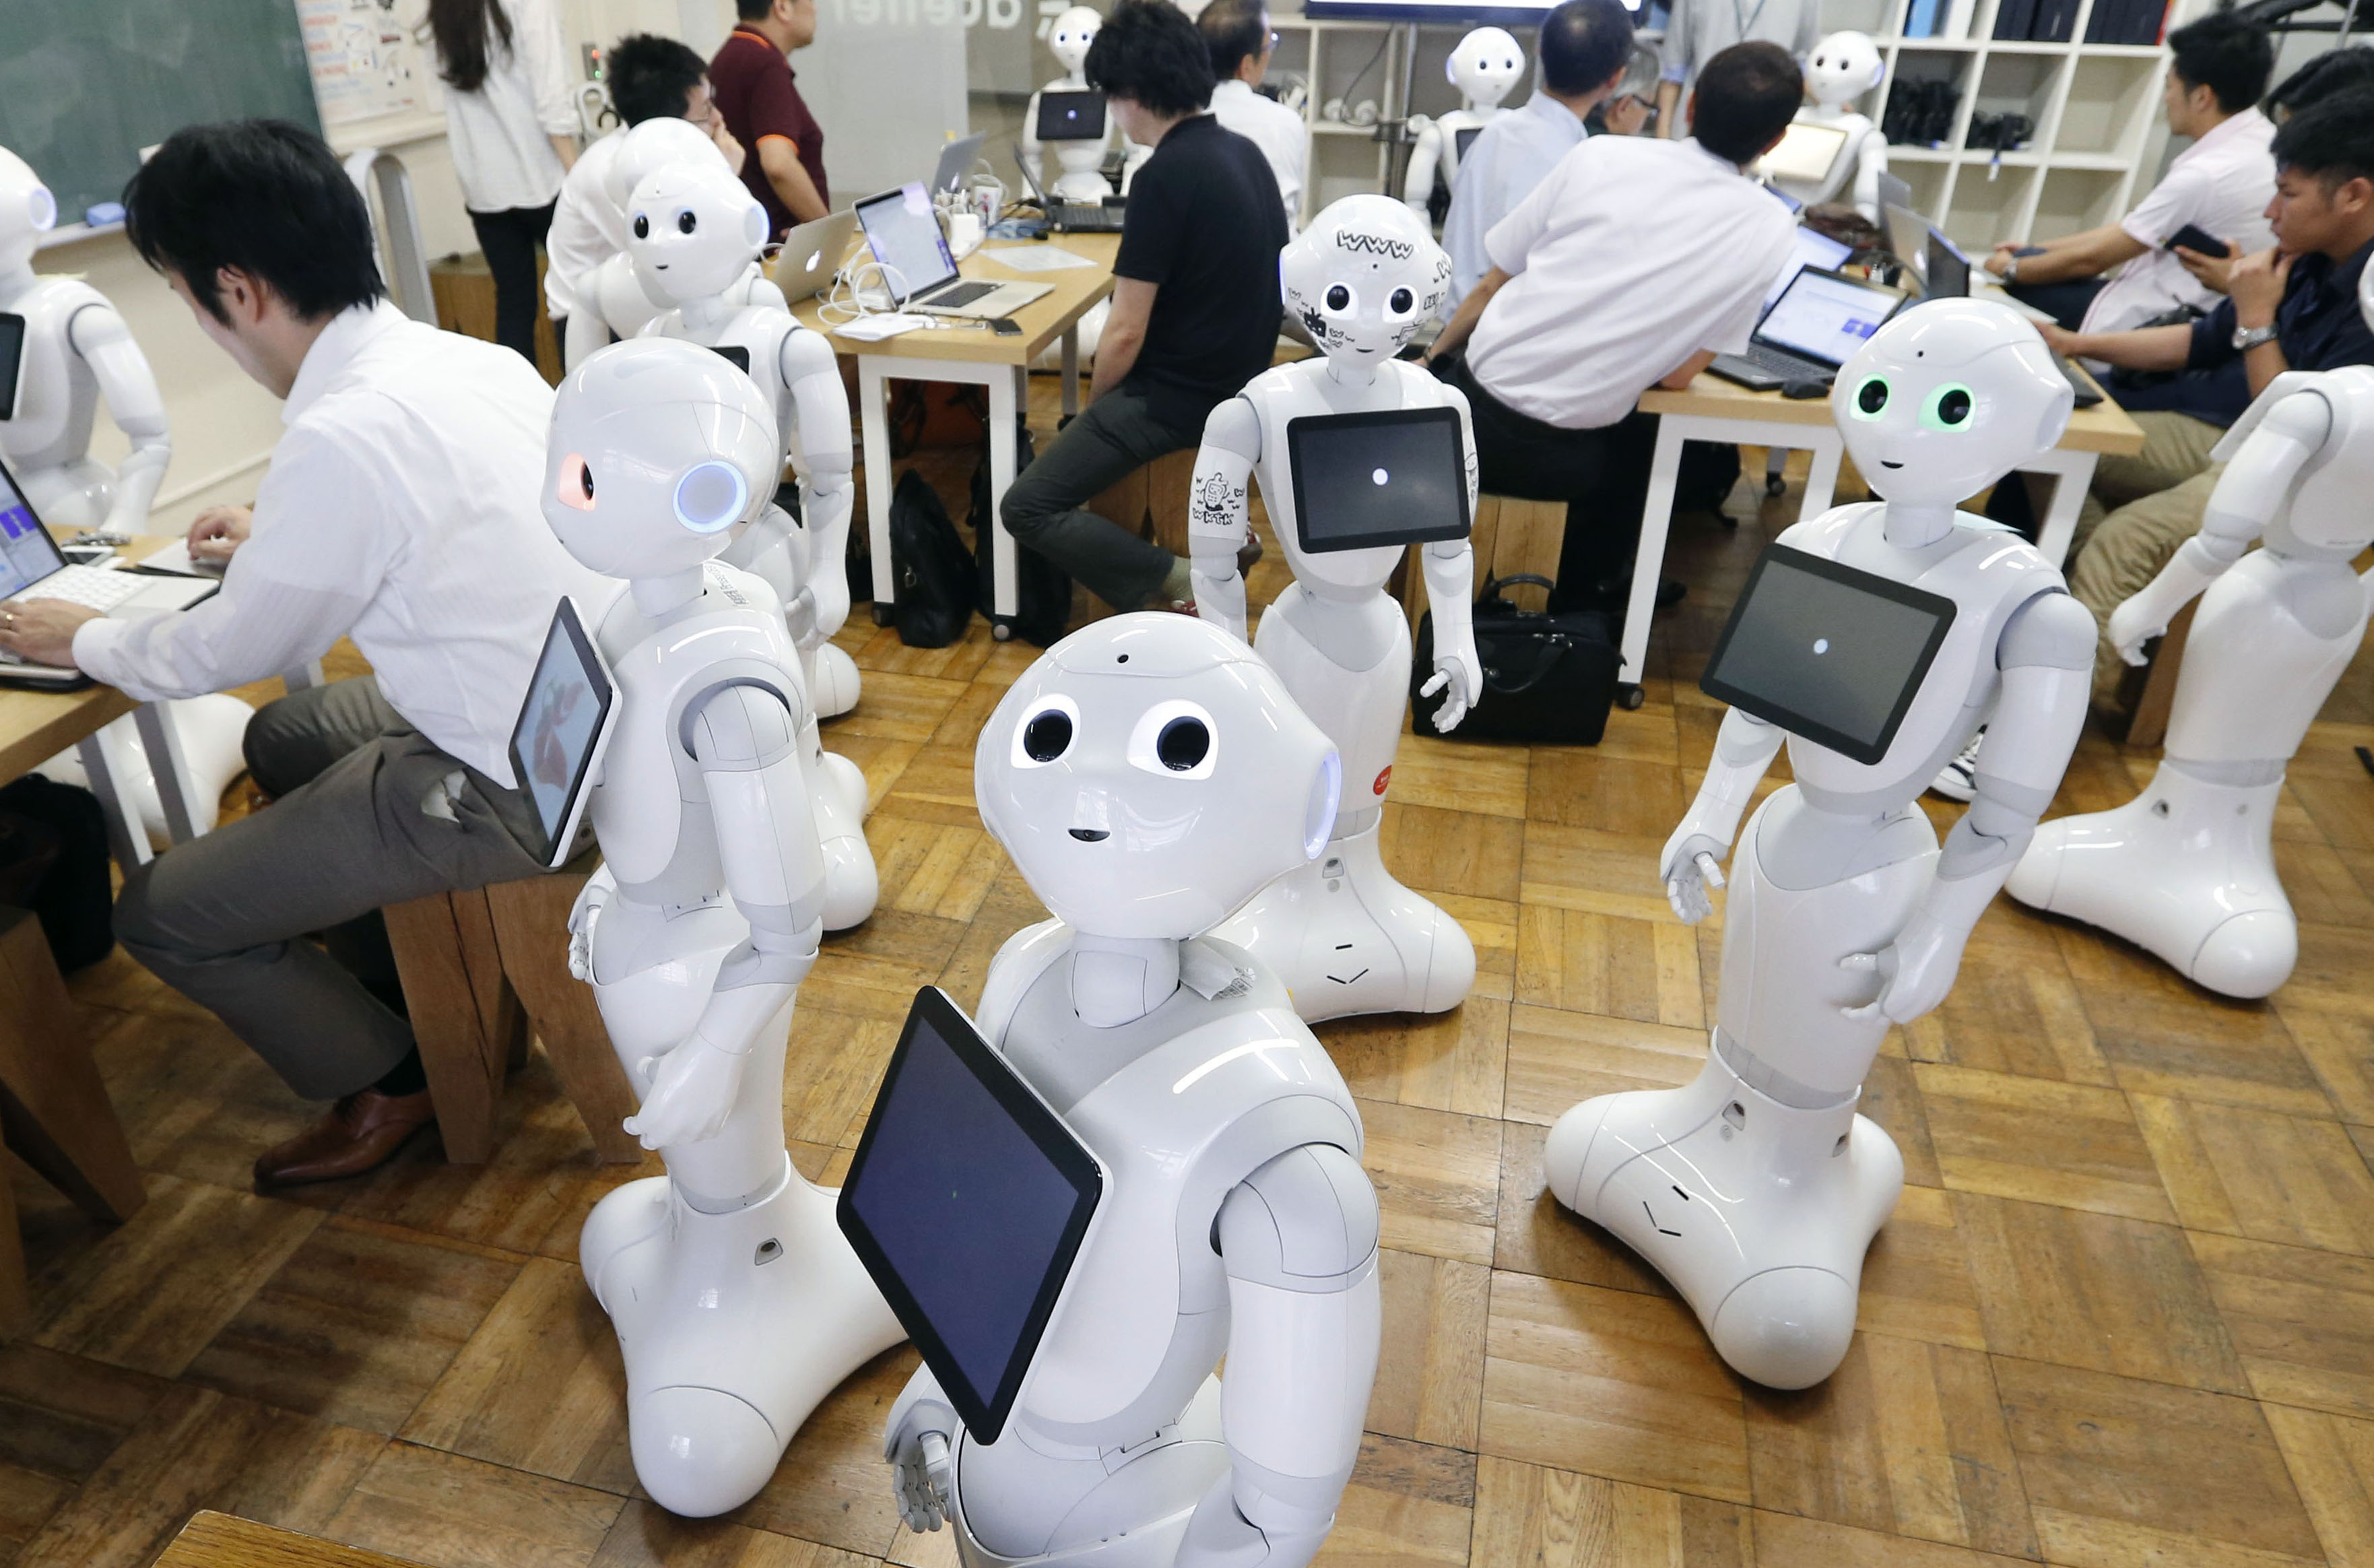 Pepper humanoid robots are shown during a July event in Tokyo. A drunken 60-year-old man was arrested Sunday for allegedly damaging a similar robot in a fit of rage at a SoftBank outlet, police said. | KYODO